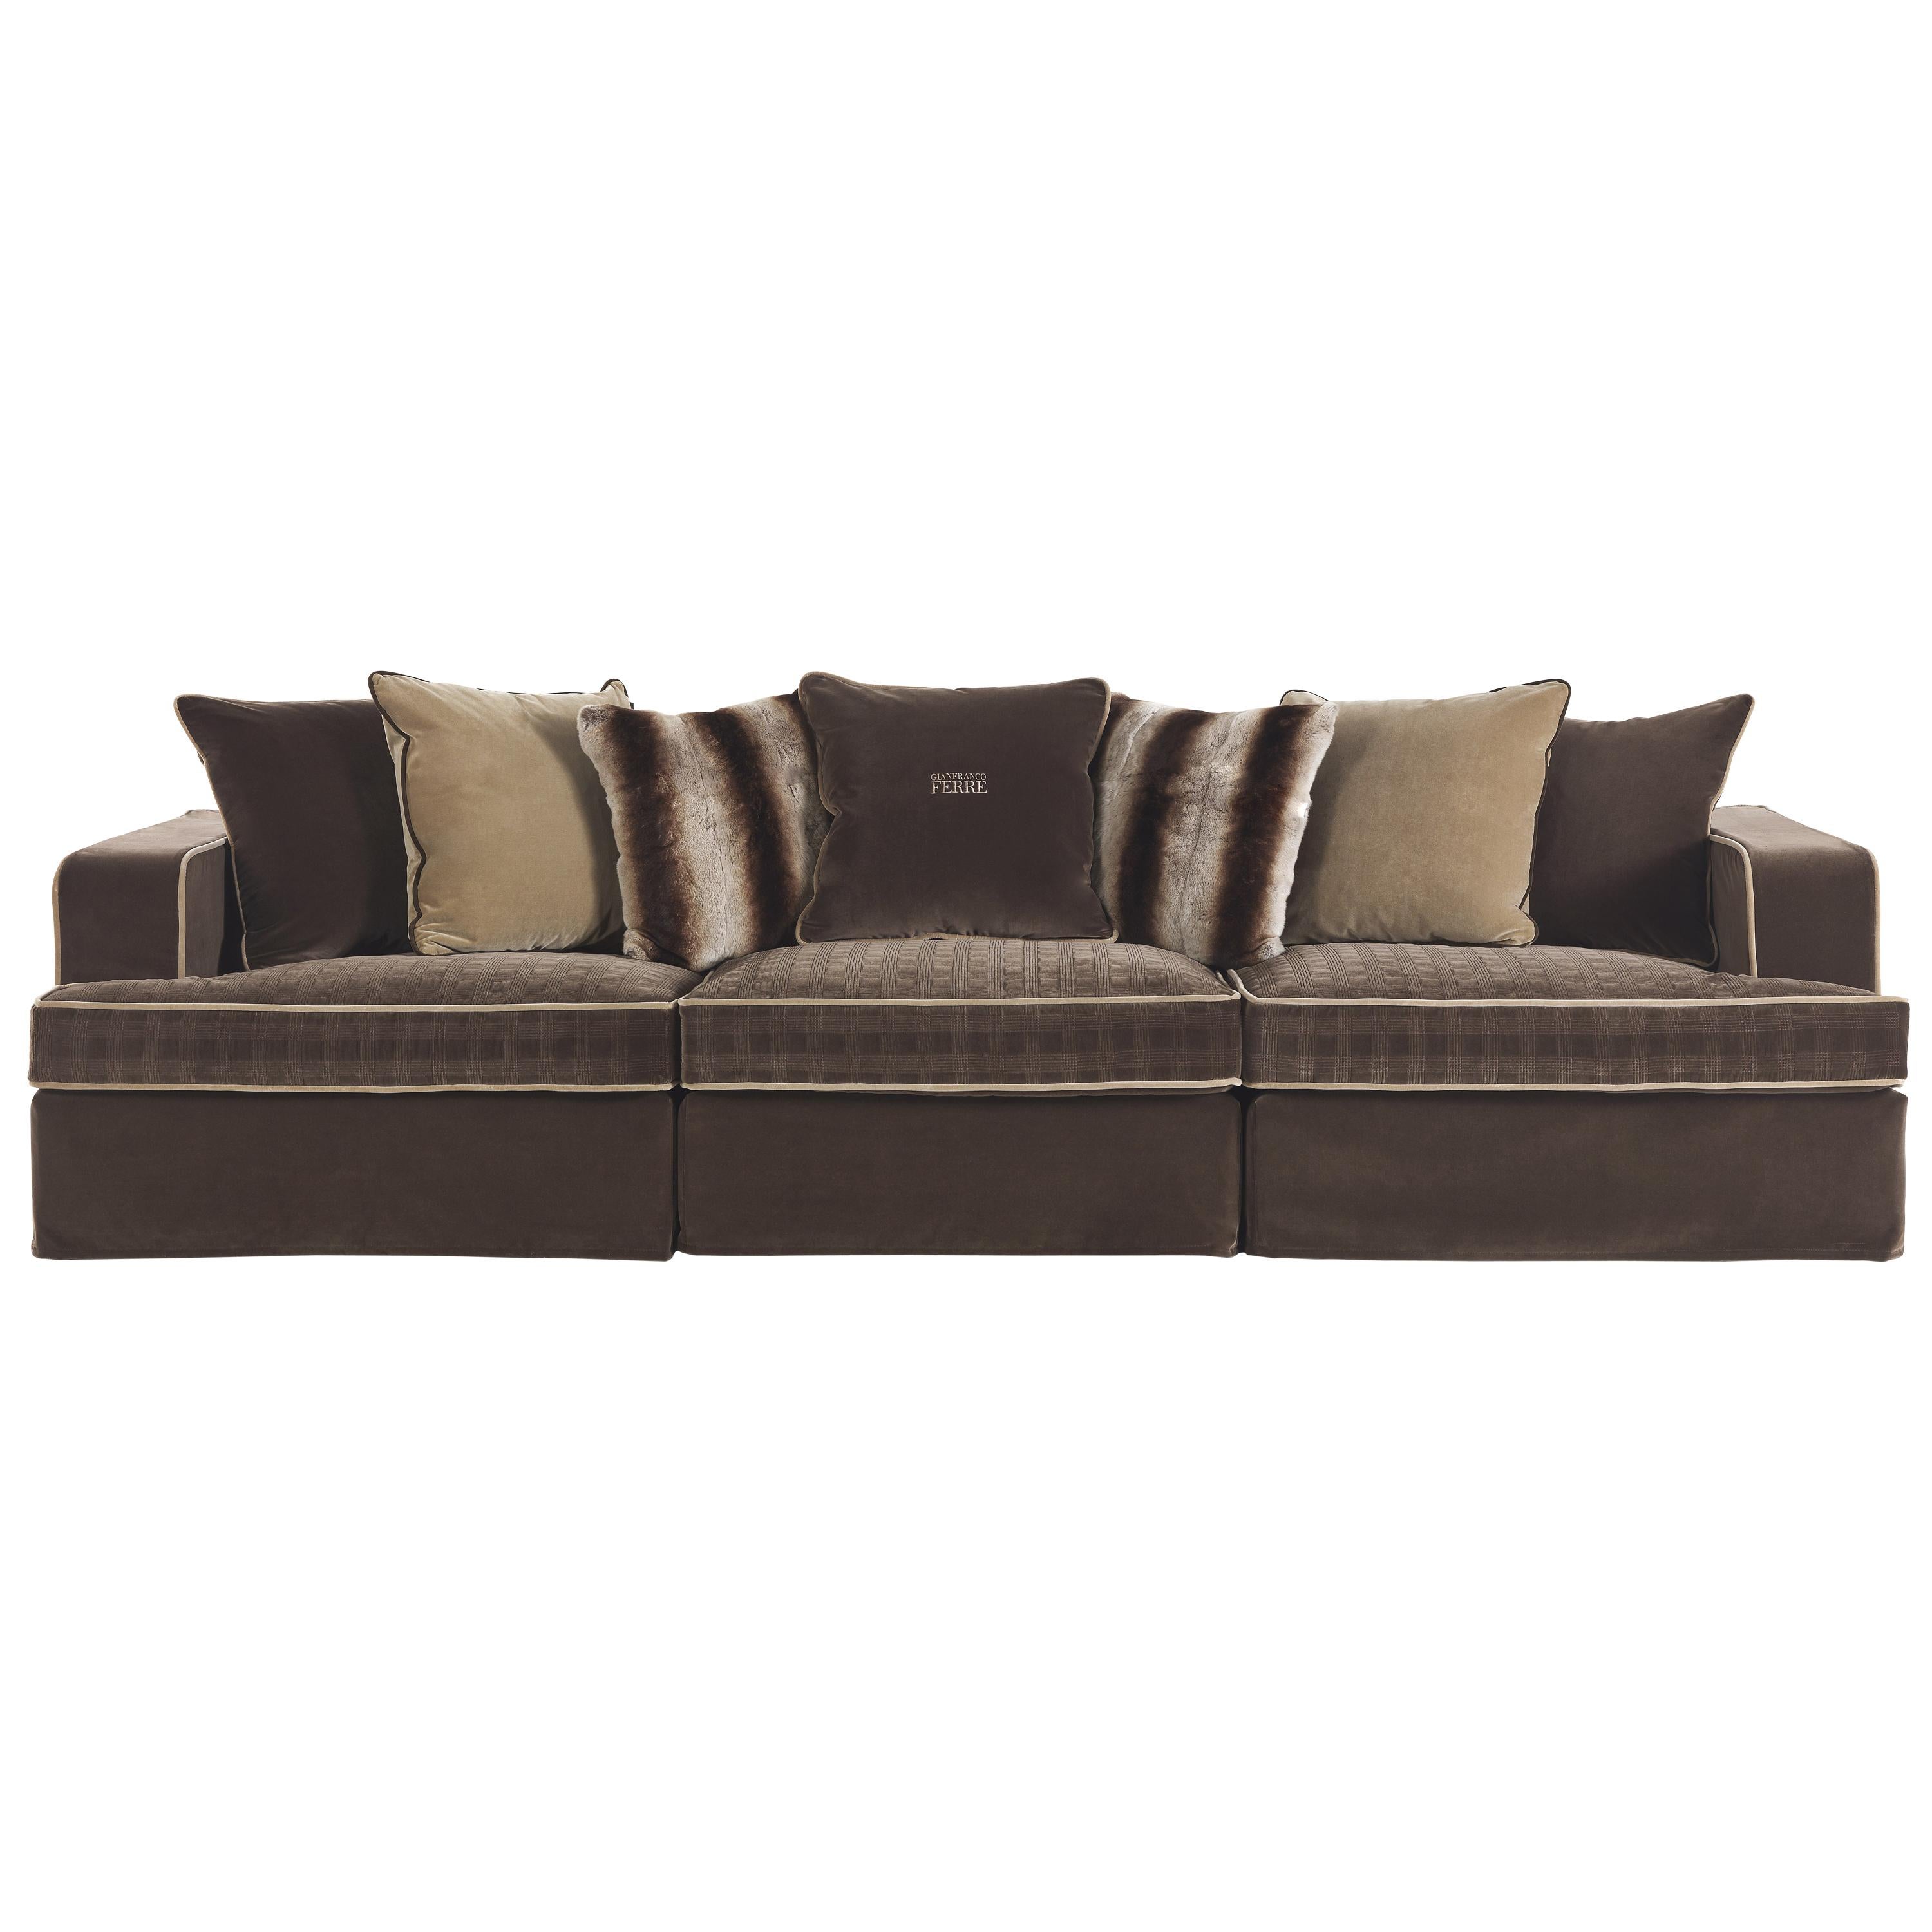 Gianfranco Ferré Home Flair Sofa in Embroidered Brown & Cotton fabric